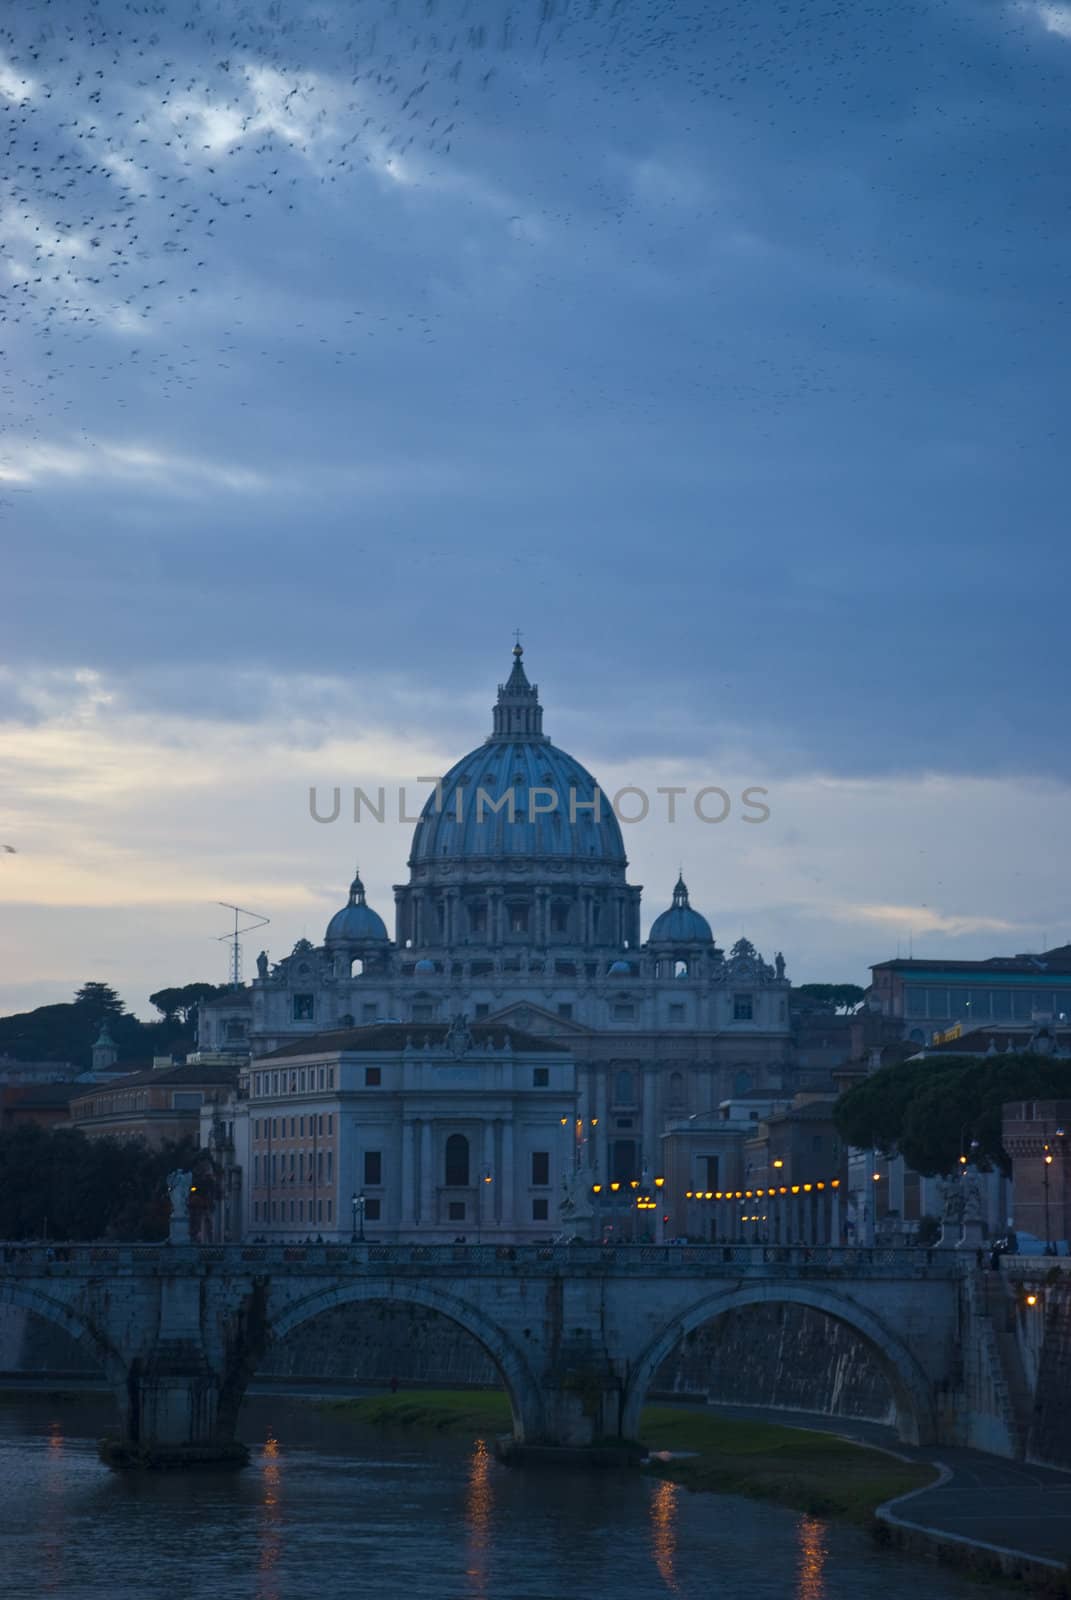 basilica of Saint Peter in the evening light